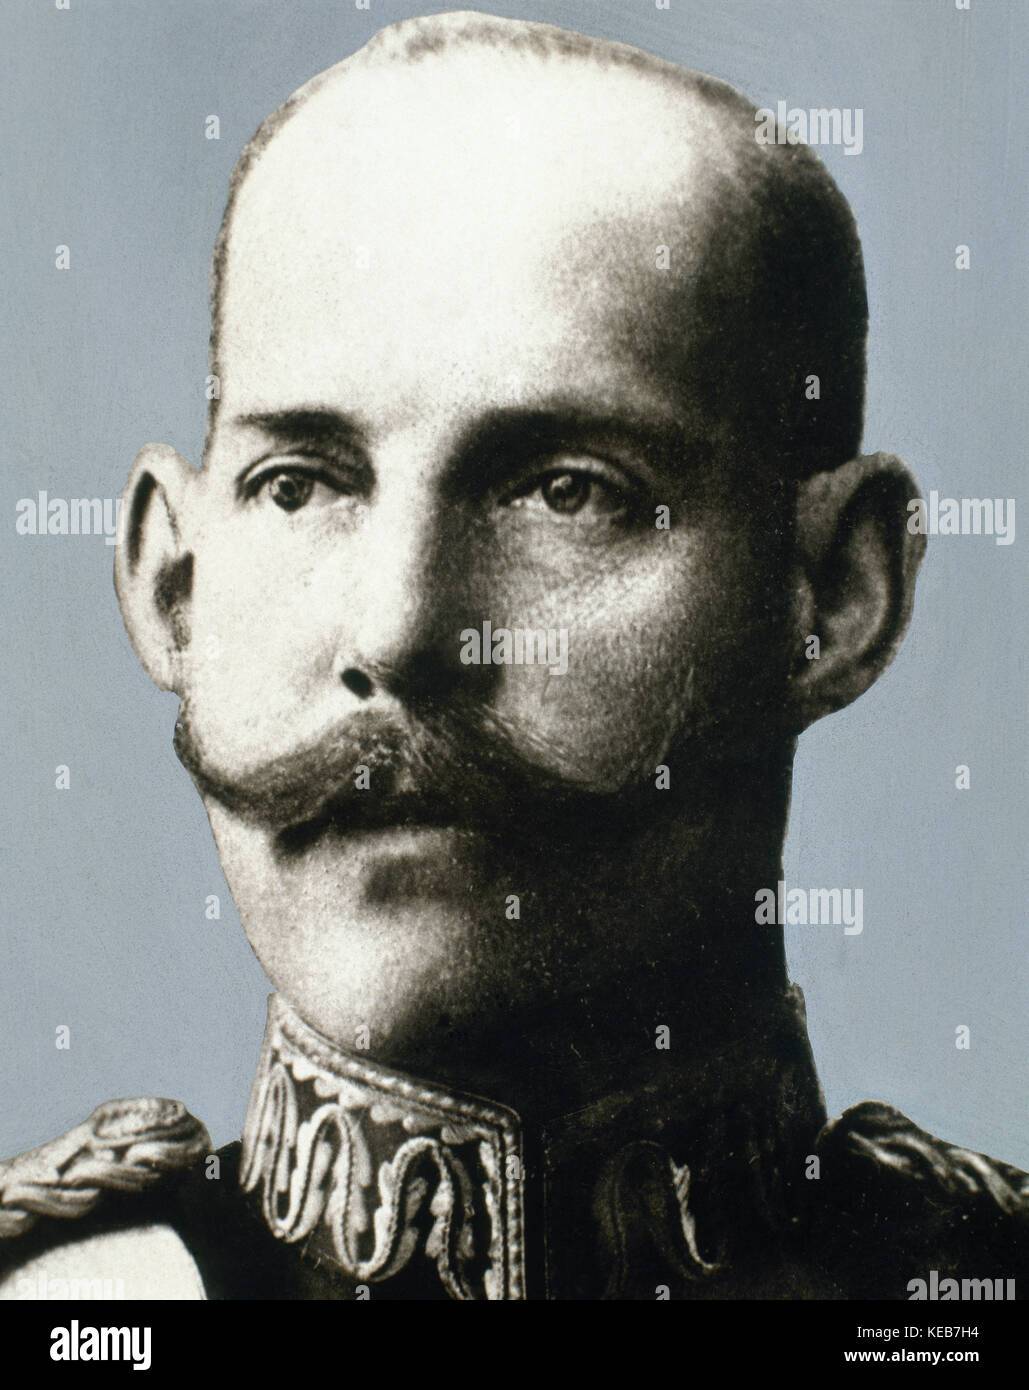 Constantine I (1868-1923). King of Greece. Portrait. Photography. Stock Photo